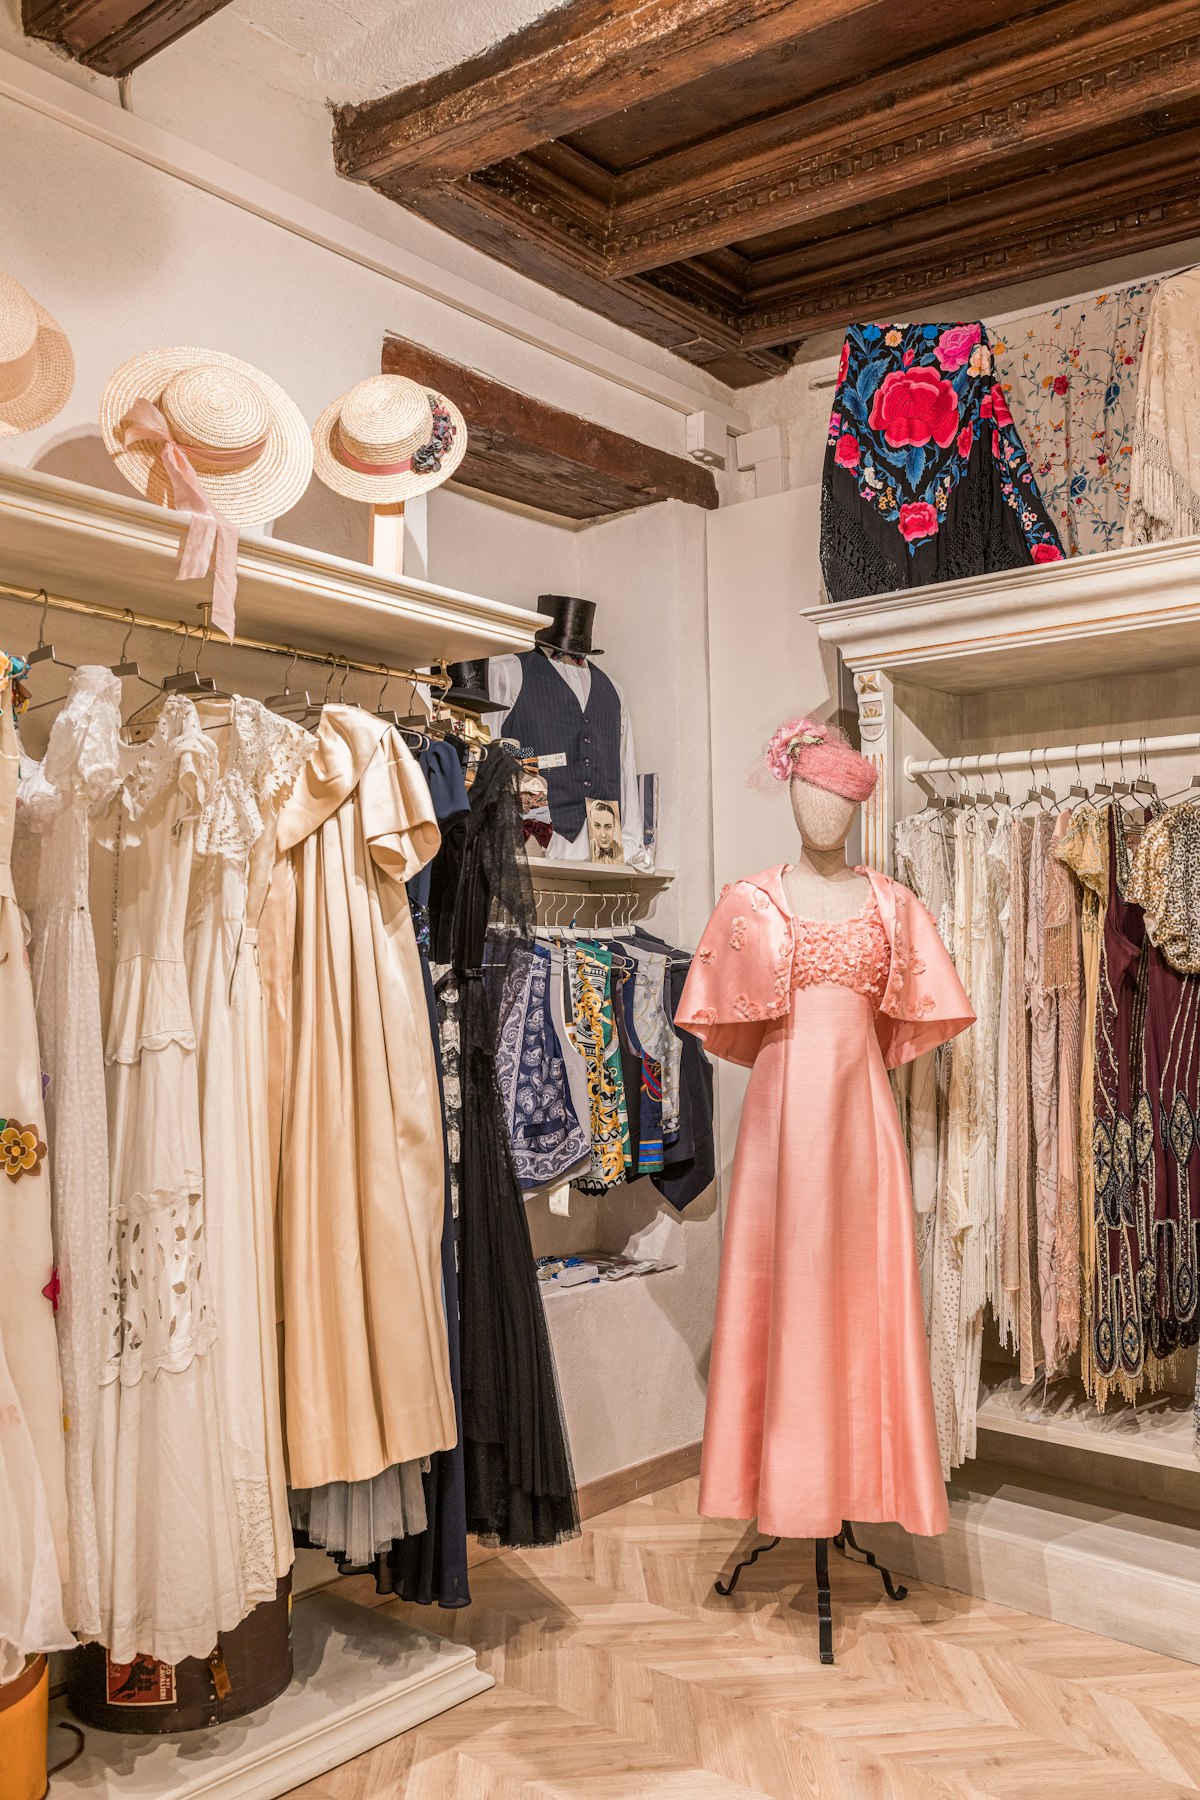 L'Arca in Barcelona is a vintage shop that specializes in bridal and Edwardian fashions. They supplied a number of costumes for the 1997 movie, Titanic.